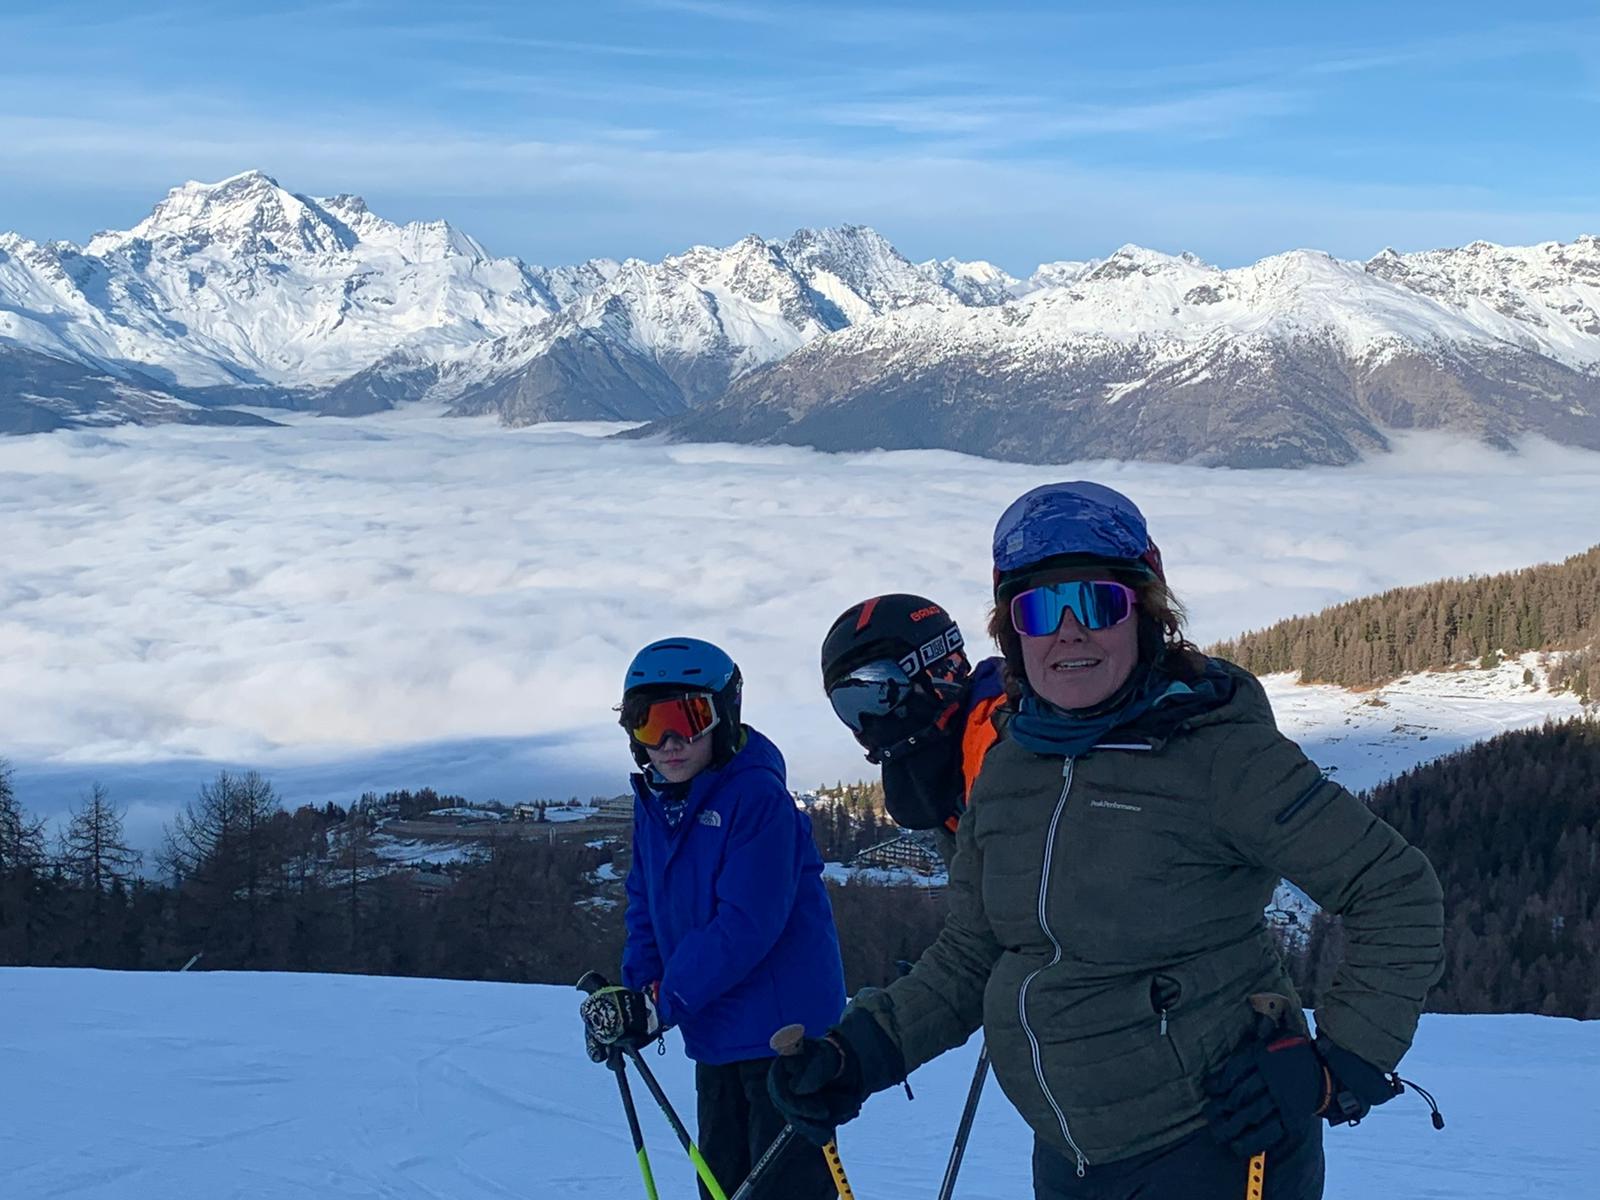 Skiing on top of Piste 2 in Pila, with inversion in the bottom. Photo: The-Ski-Guru. How Much Snow does a Mountain Need to Open its Pistes?